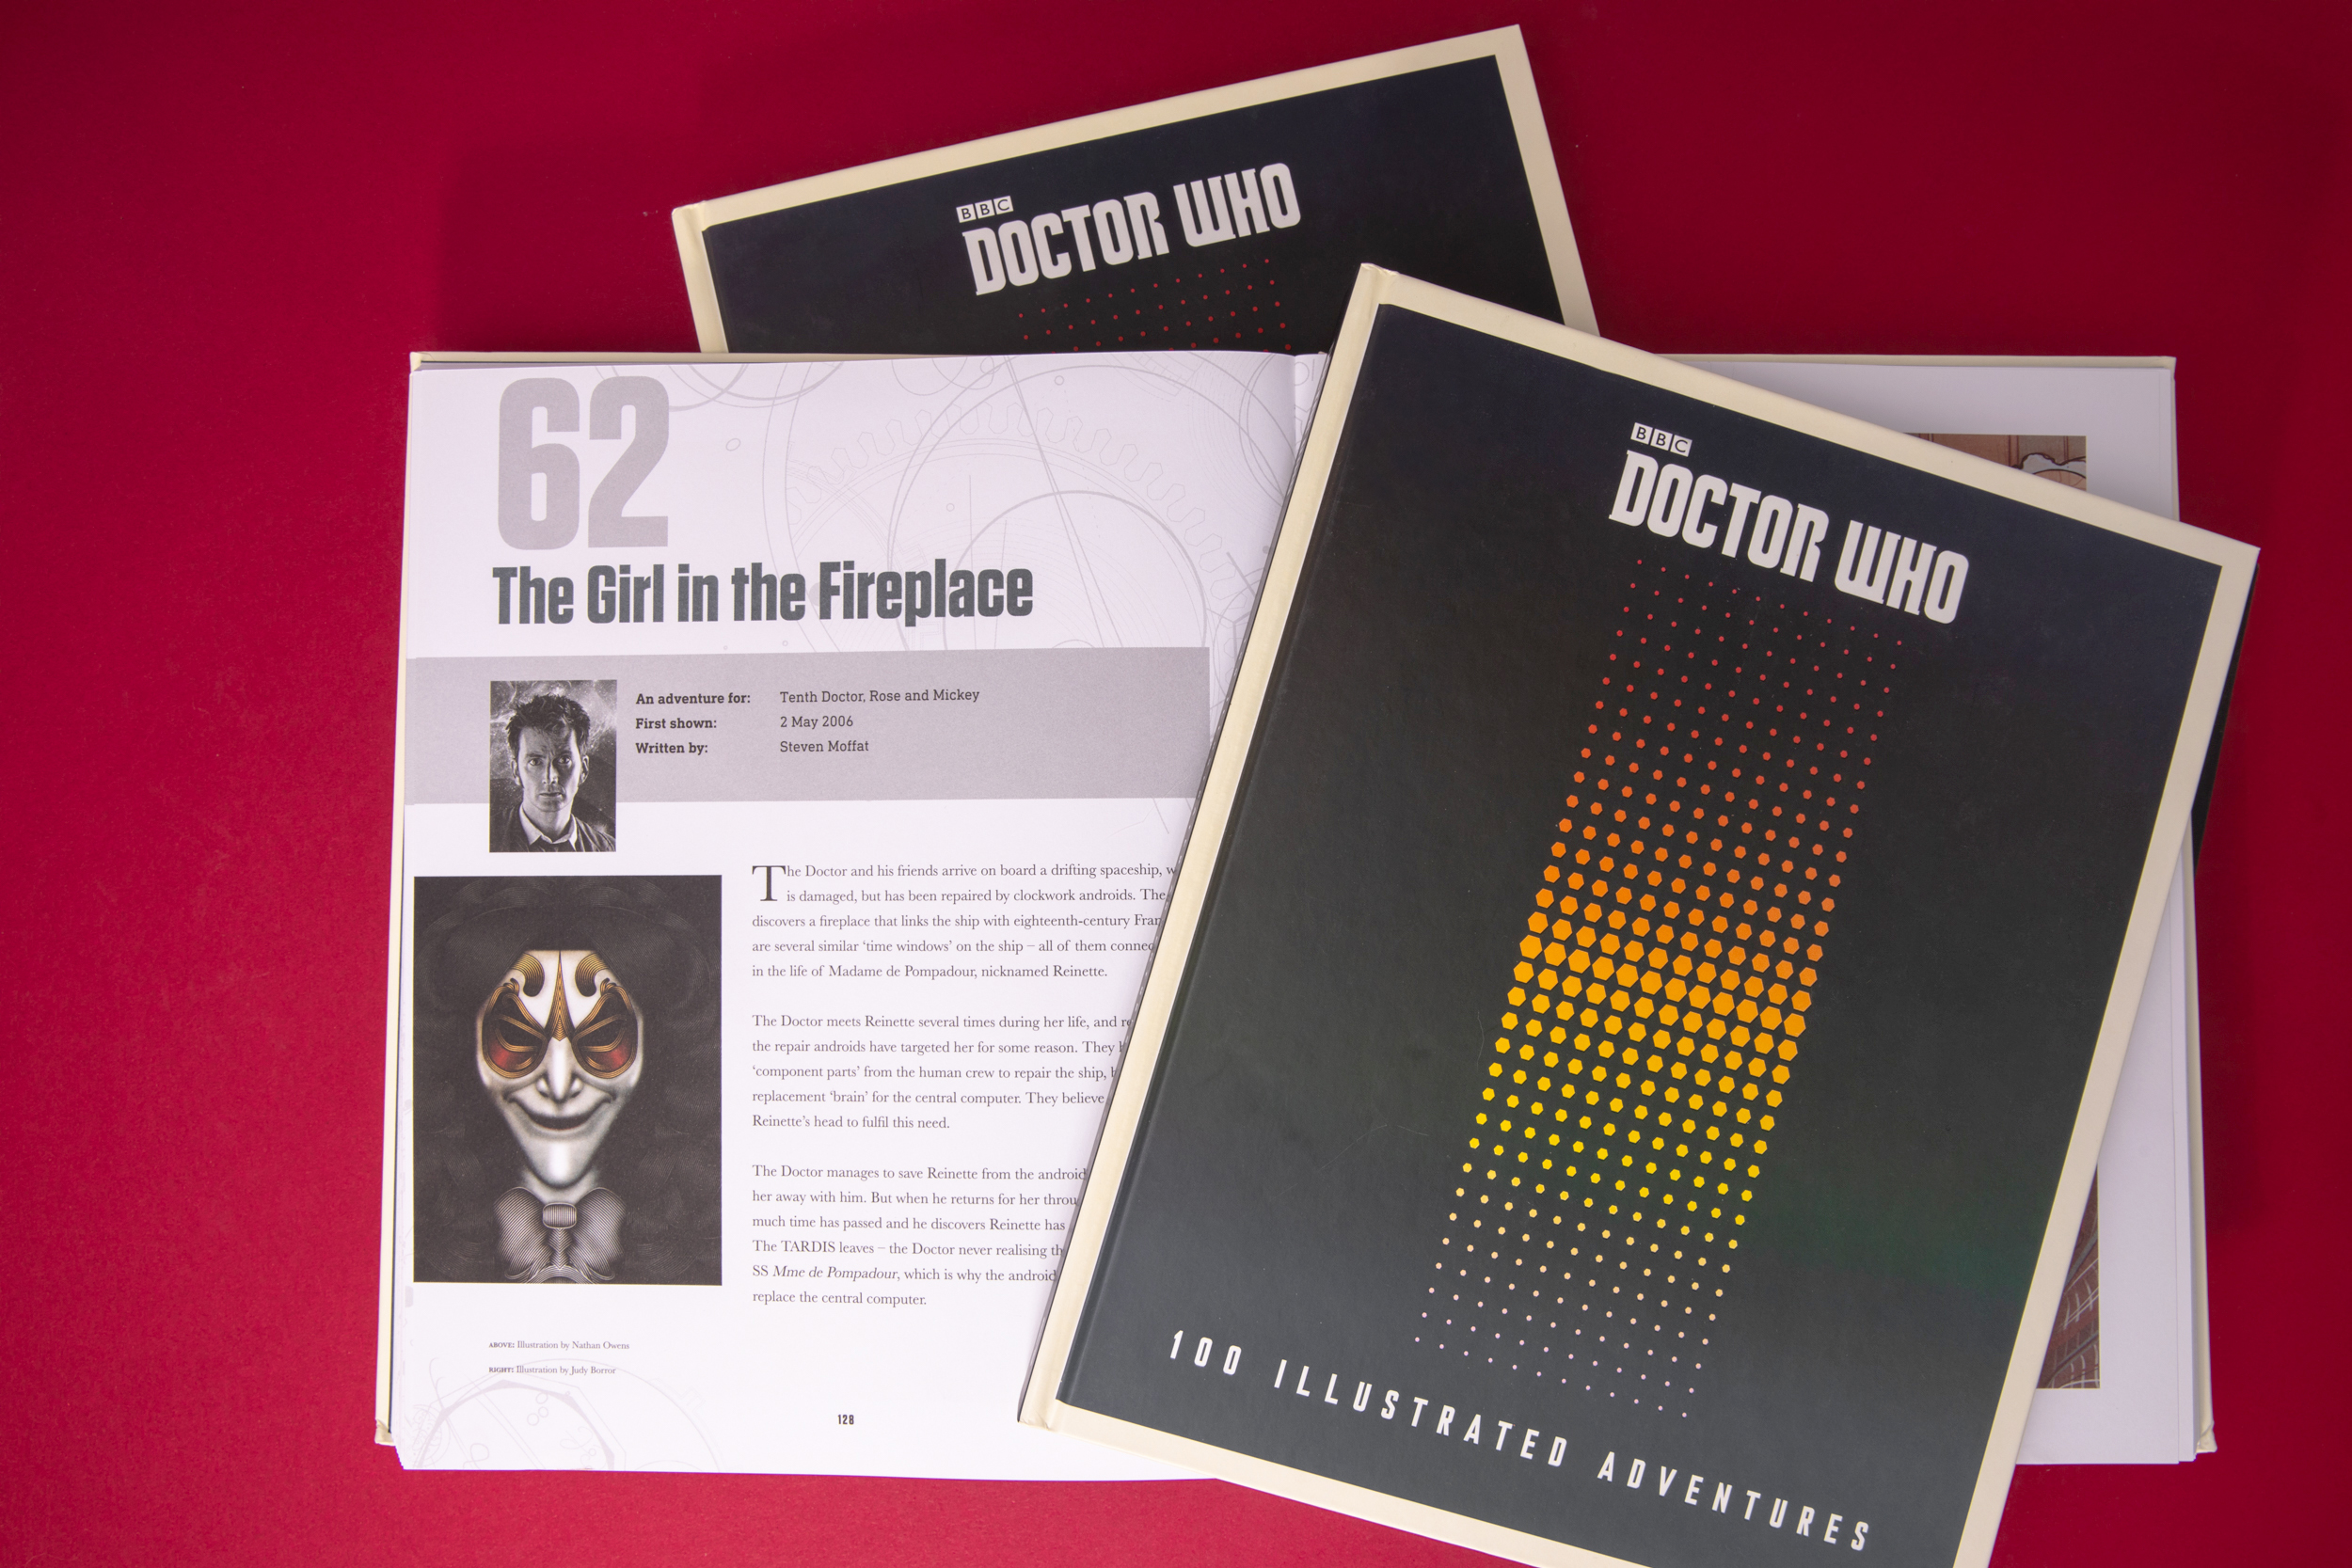 BBC Doctor Who 100 Illustrated Adventures Book